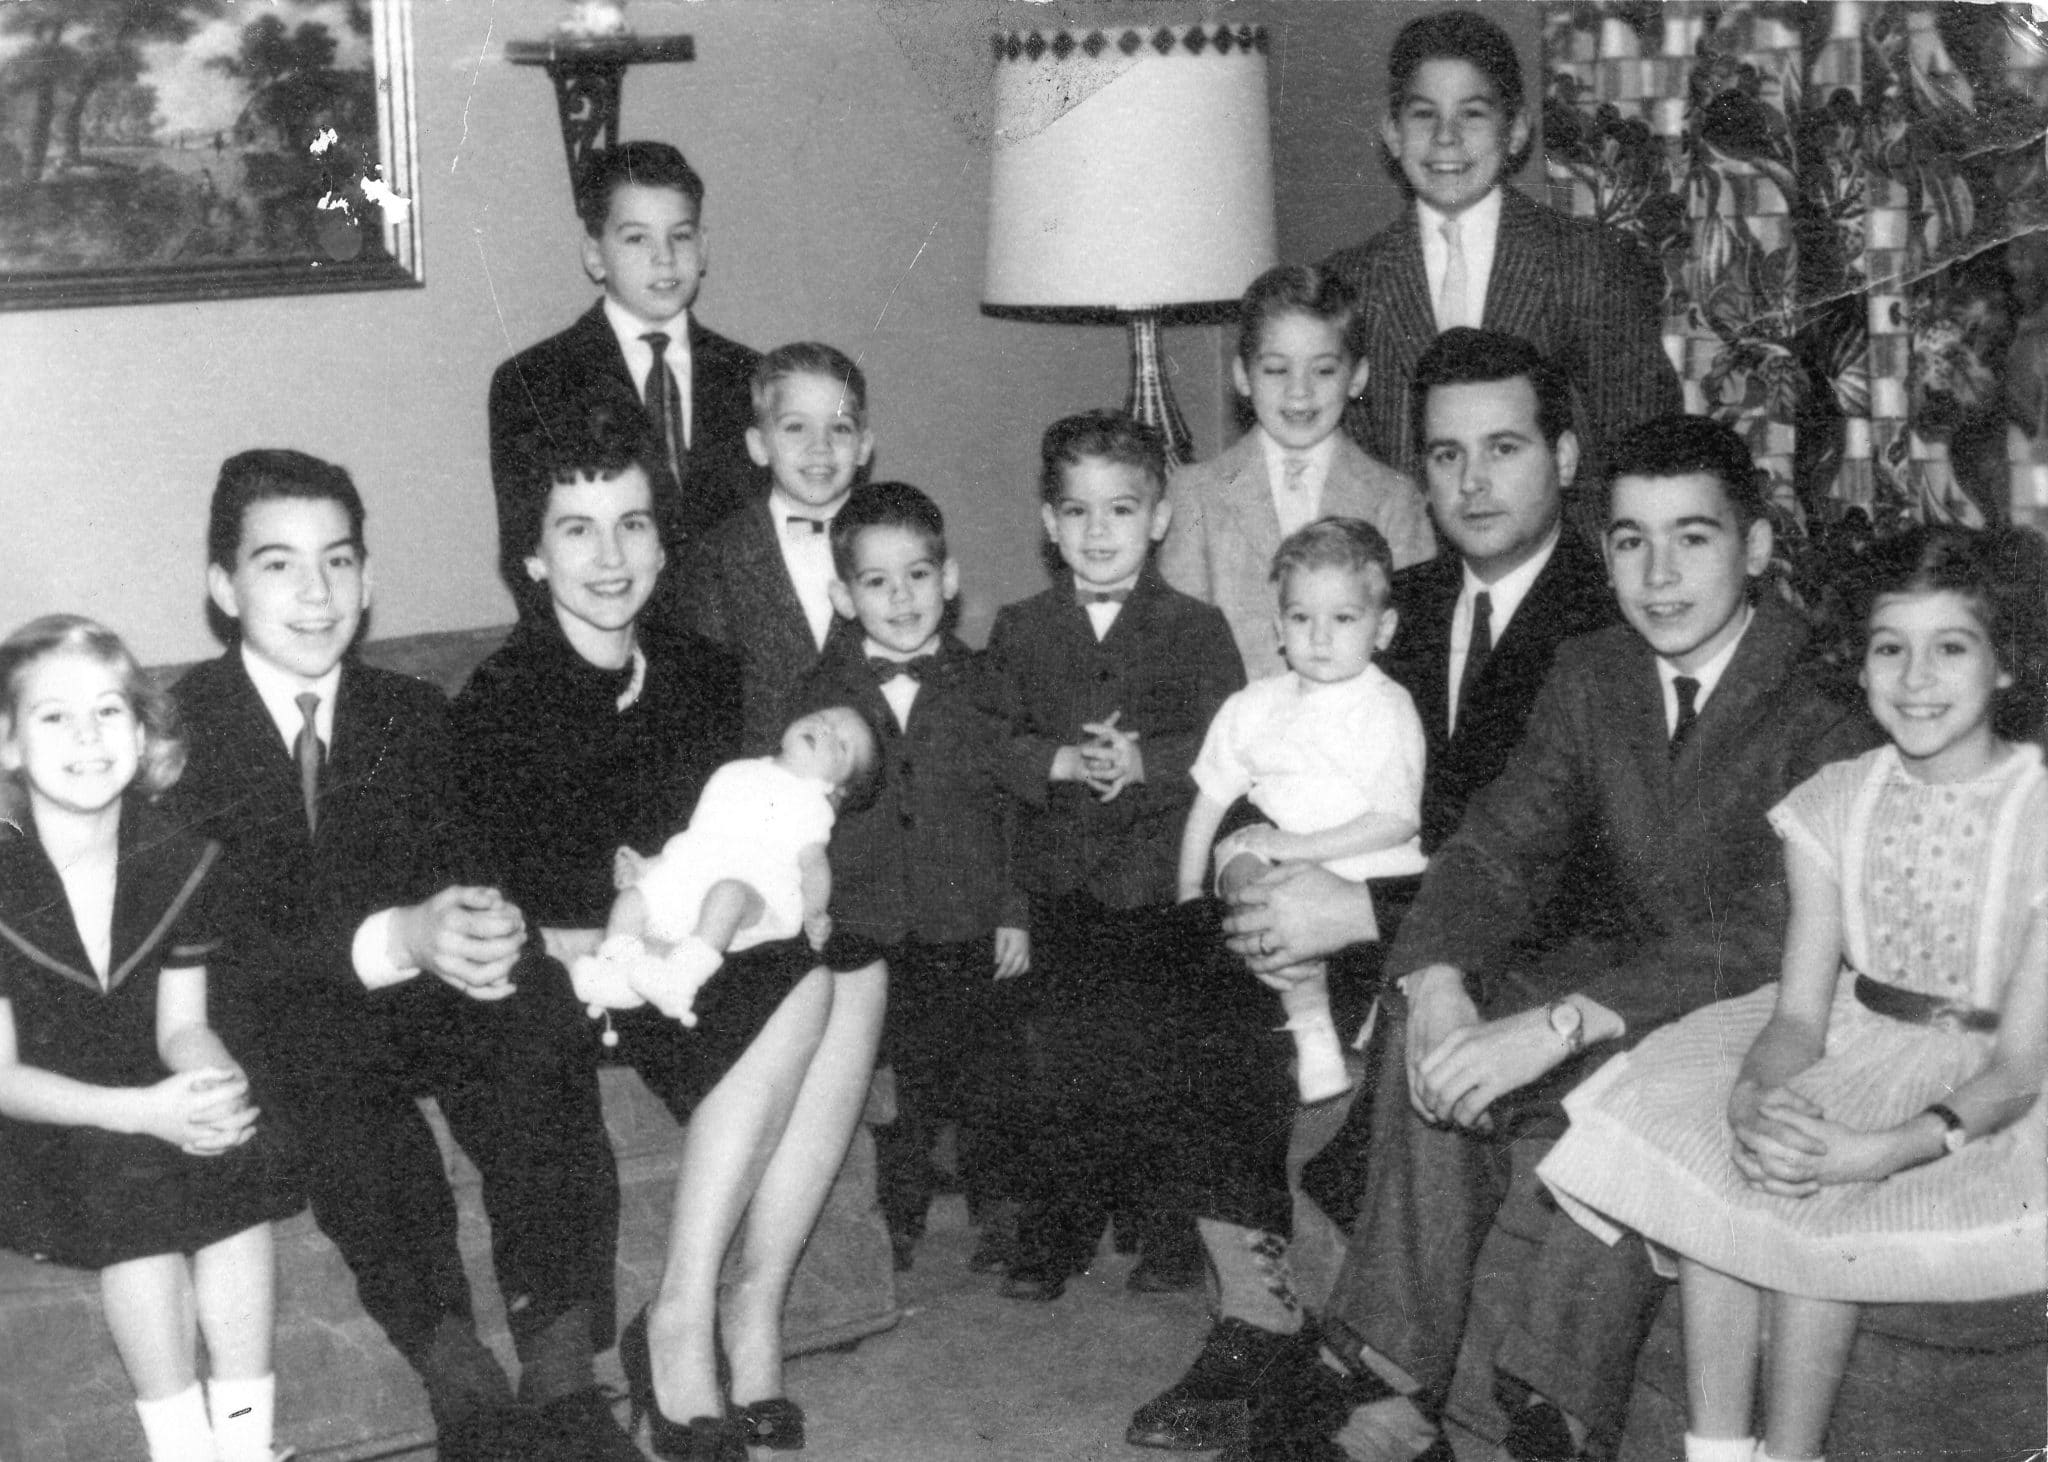 Lennon family in 1959. I am standing in the back on the right